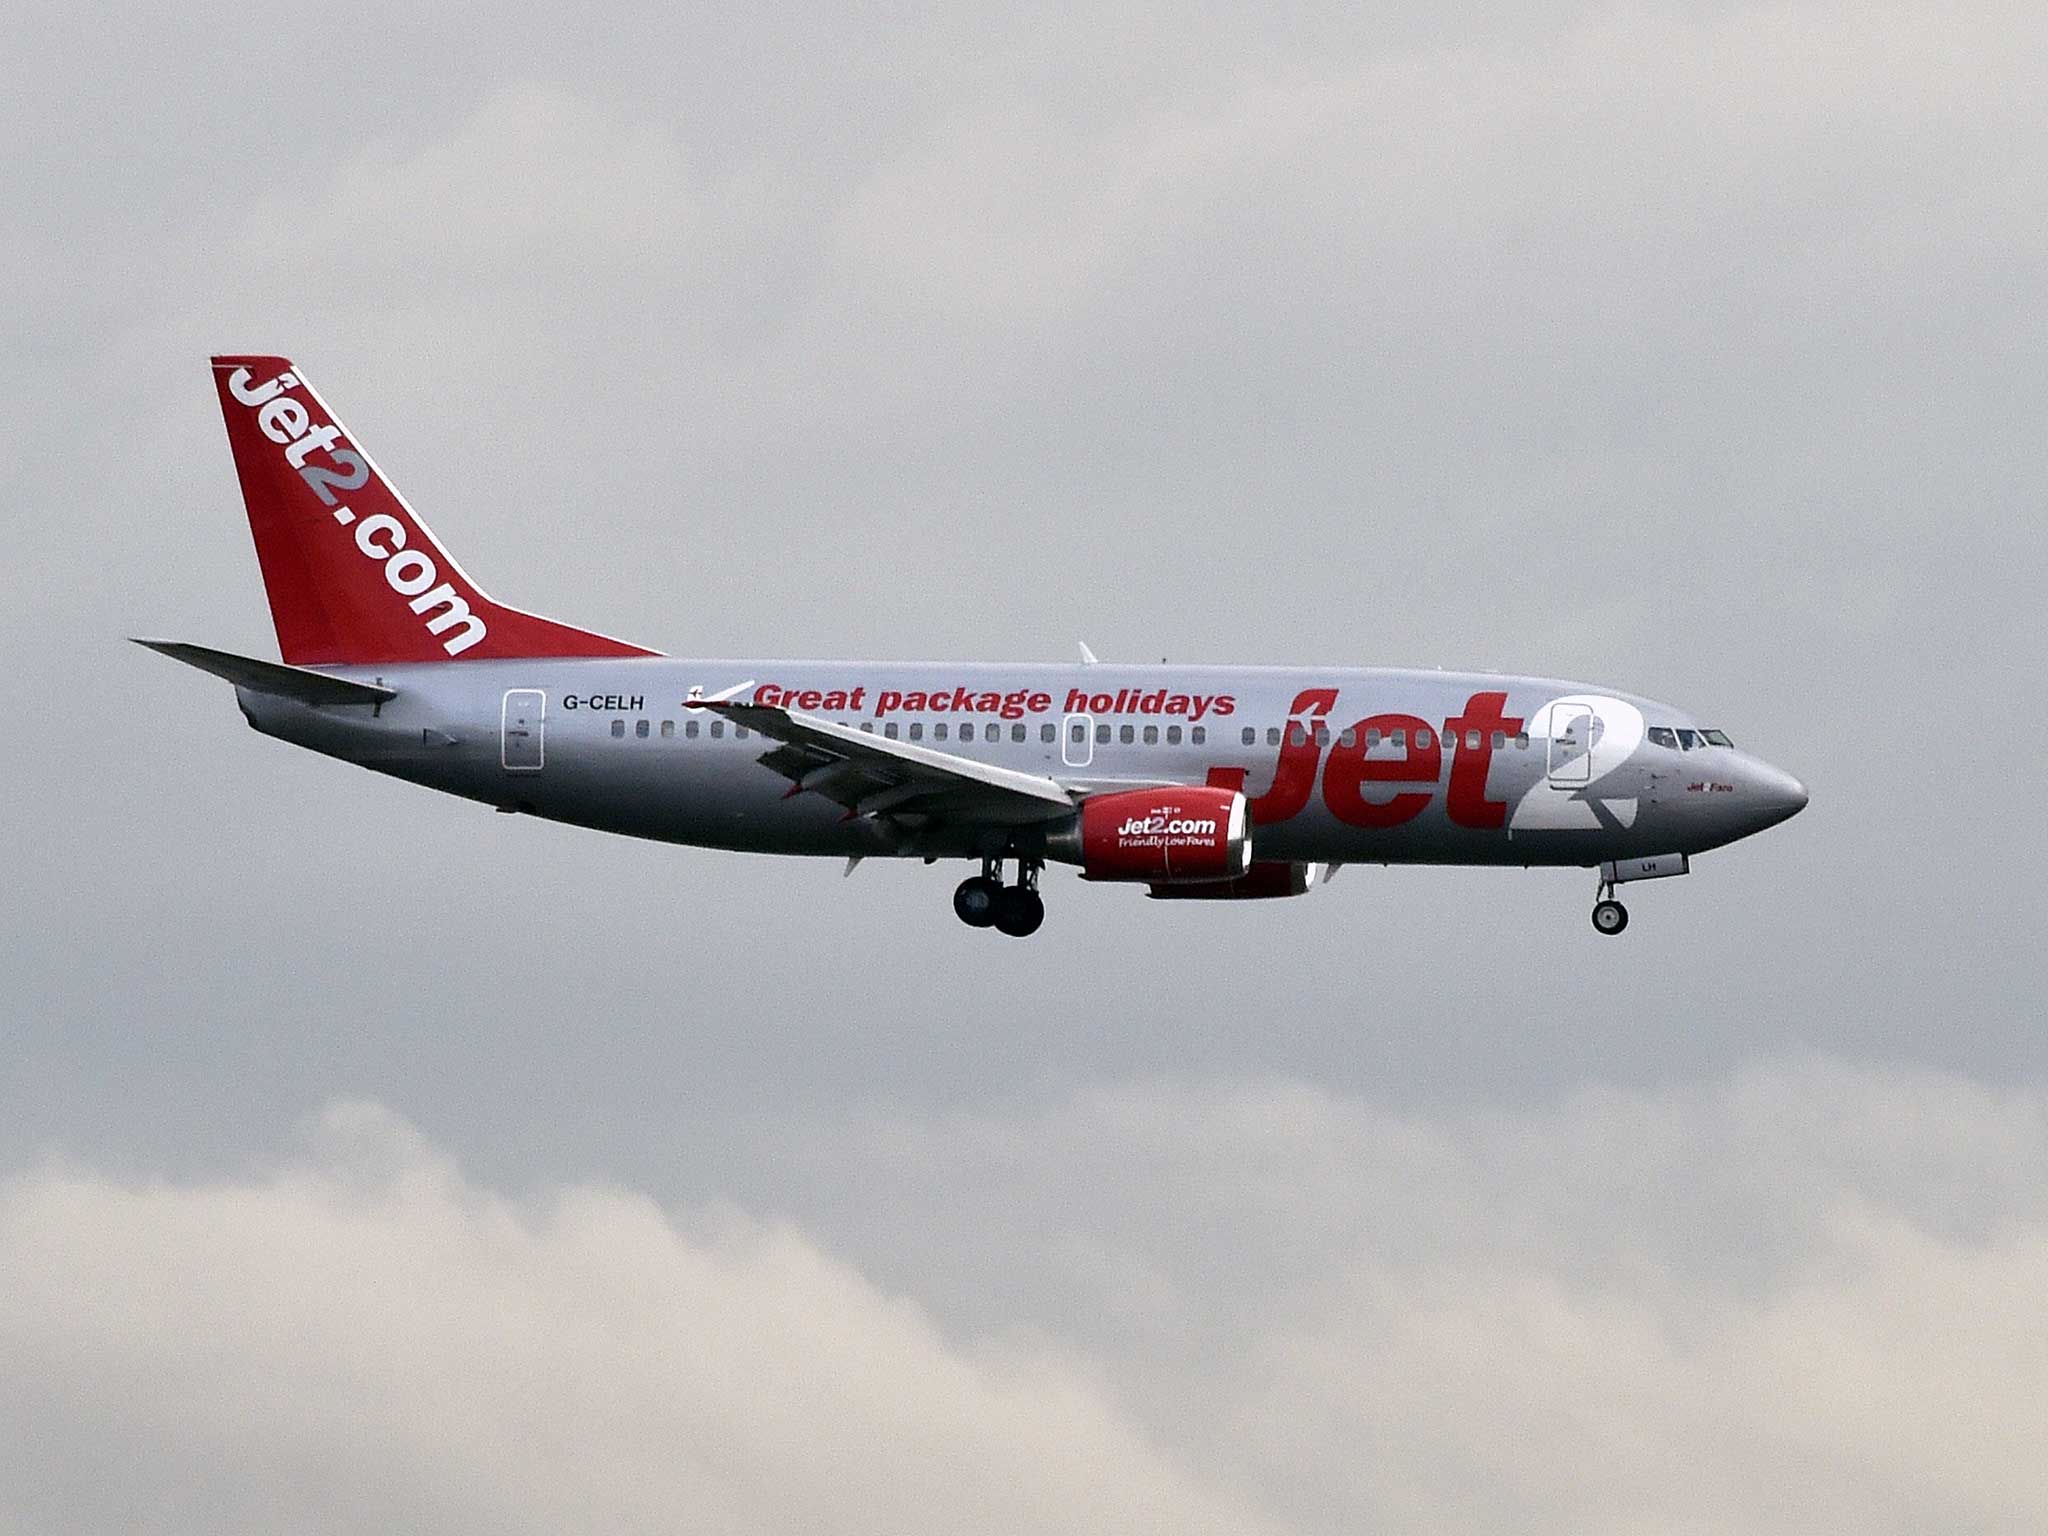 A woman and her daughter were told they couldn't board their Jet2 flight